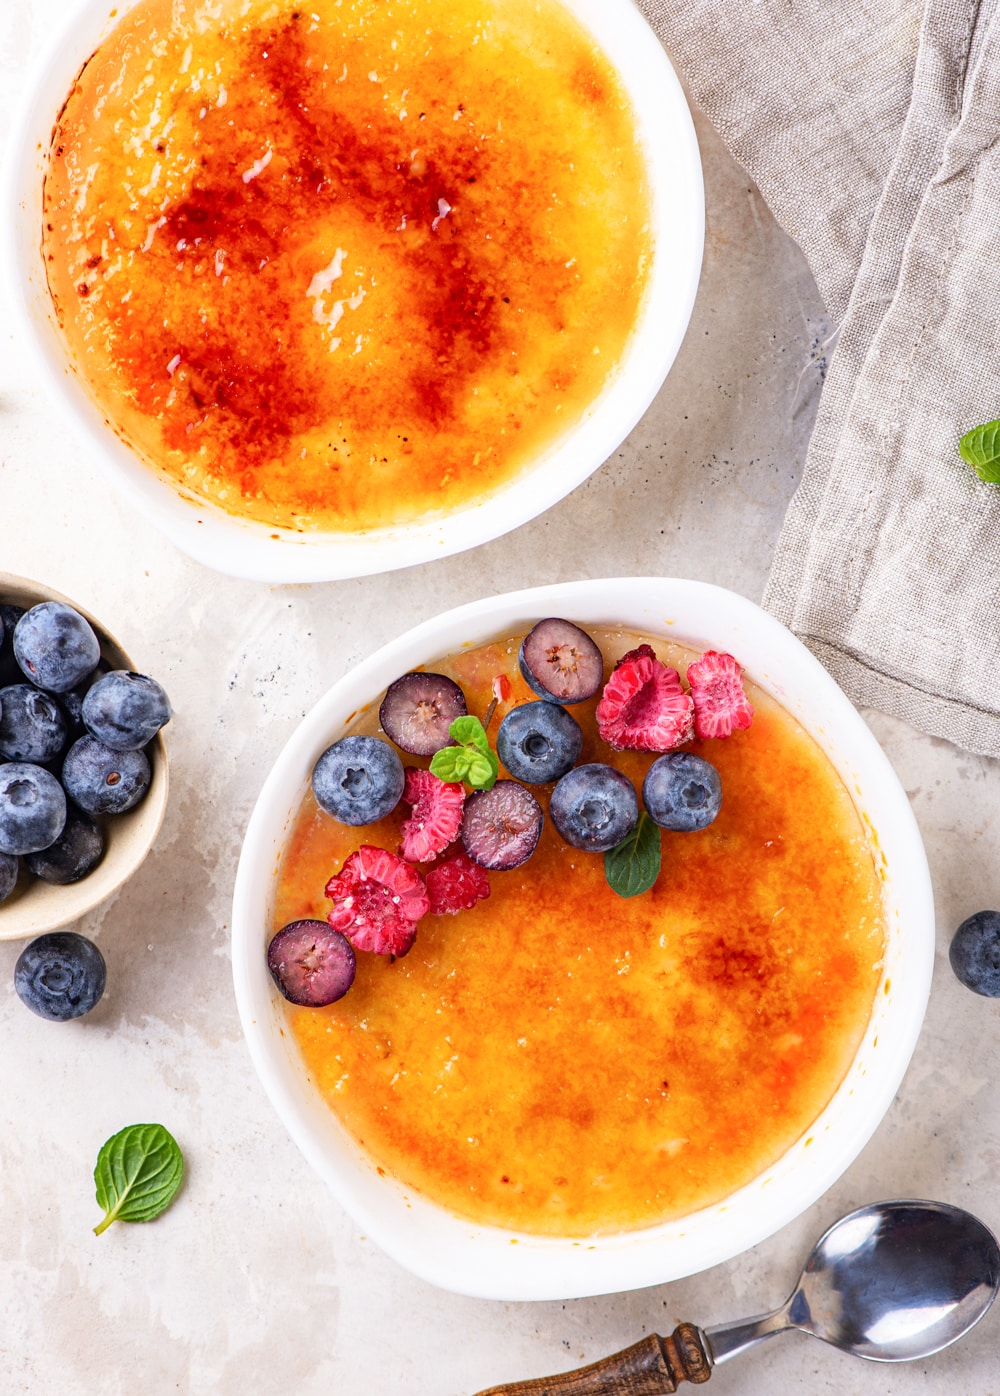 An overhed view of two ramekins filled with creme brulee with one ramekin in front of the other. The ramekin in the front has sliced raspberries and blueberries on the back half of the vegan creme brulee. A small bowl of blueberries is to the left, between the ramekins. A spoon is front of the first ramekin and everything is on a white counter.